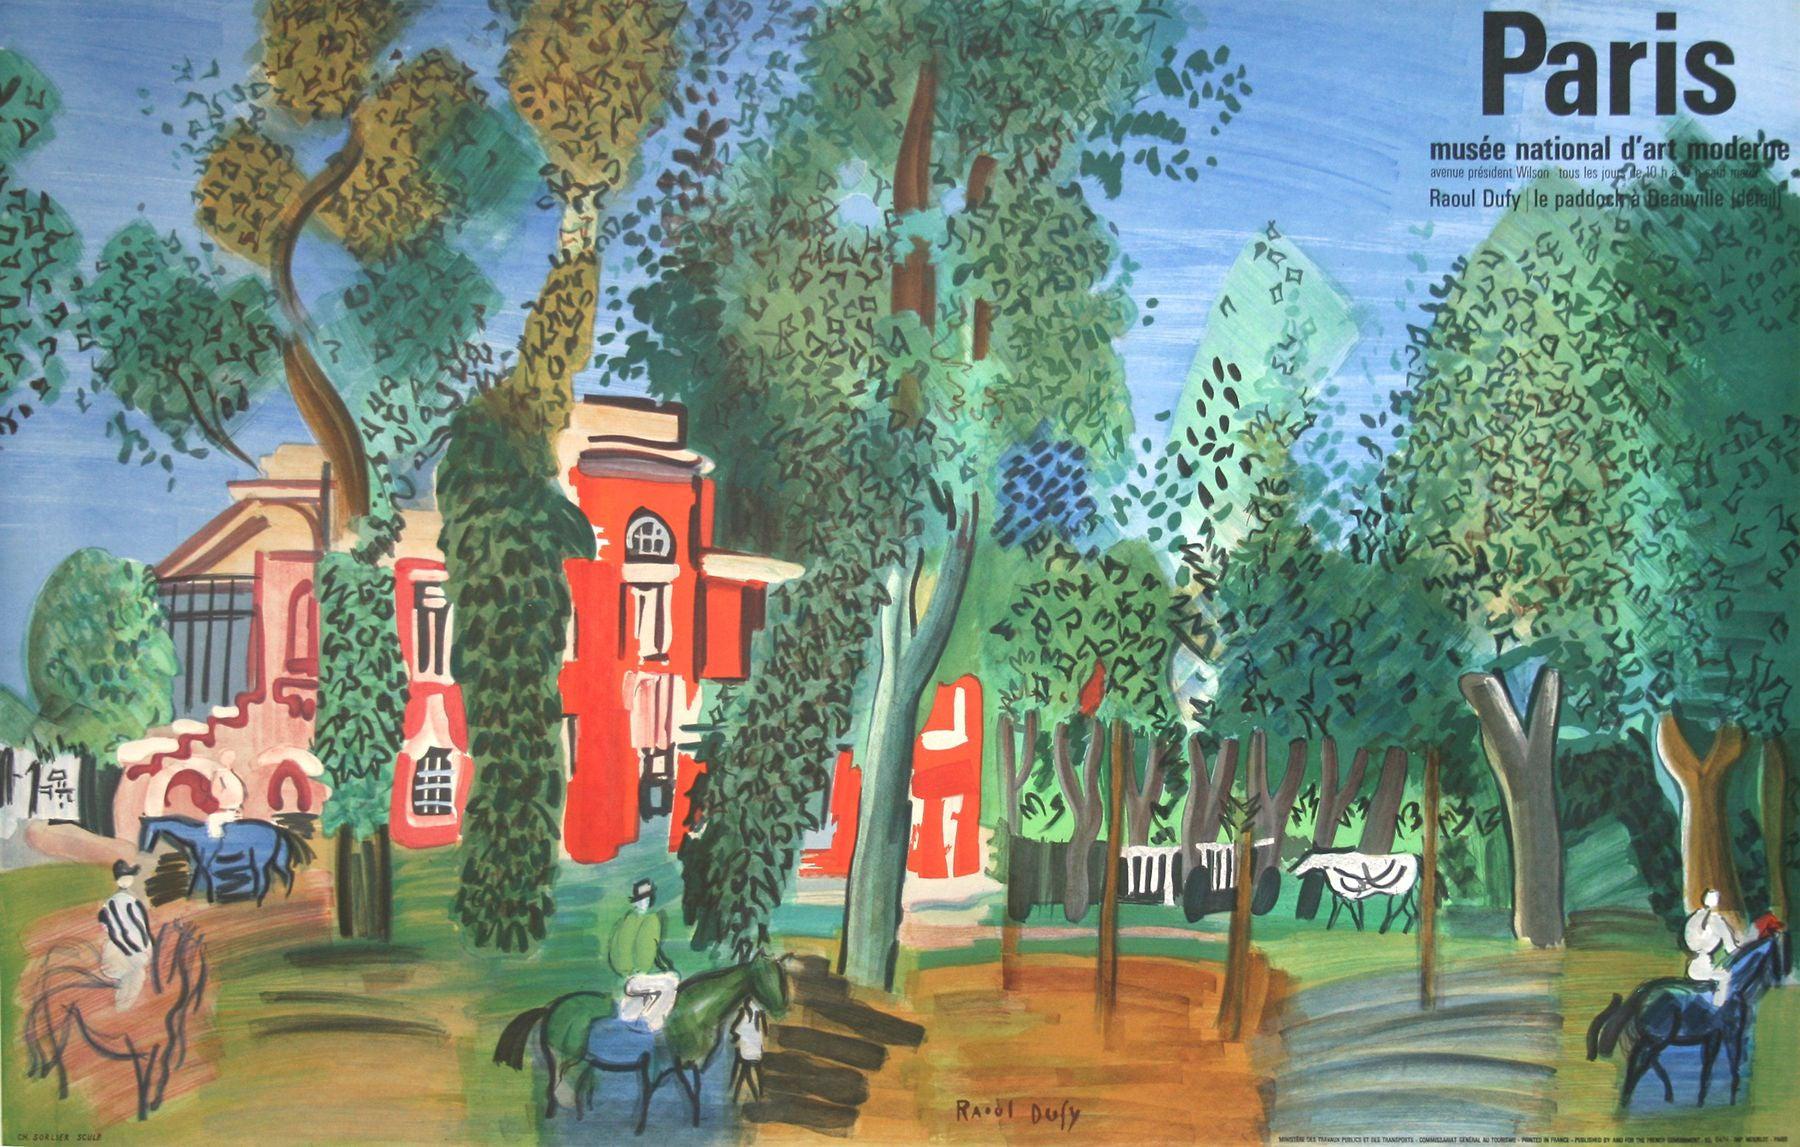 Le Paddock A Deauville Poster by Raoul Dufy c1964